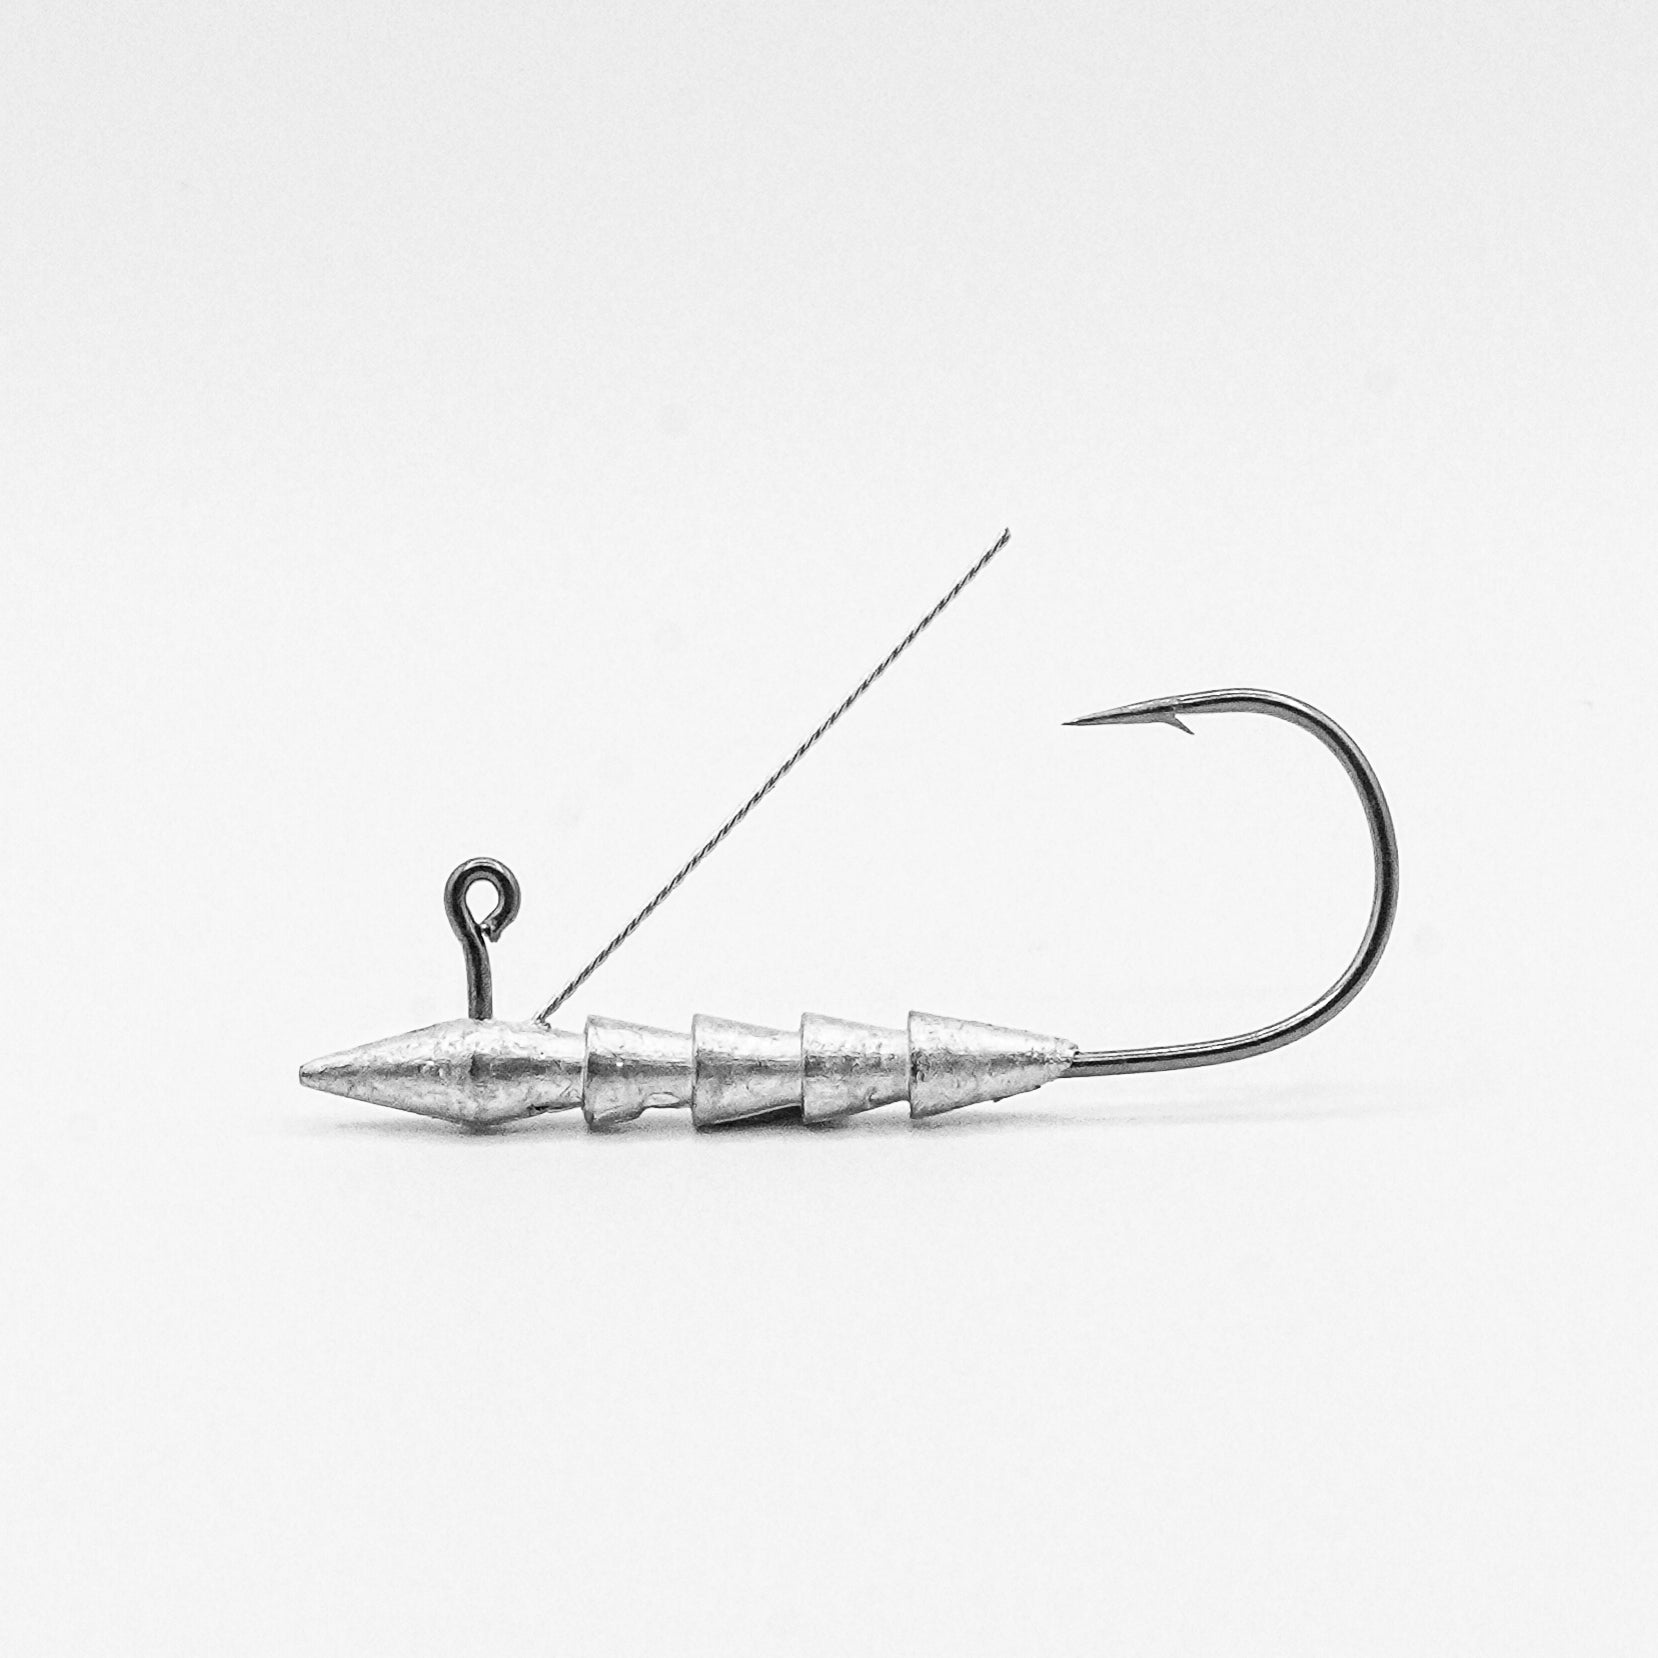 Say goodbye to exposed lead weights! Our Weedless Hover Rig hides